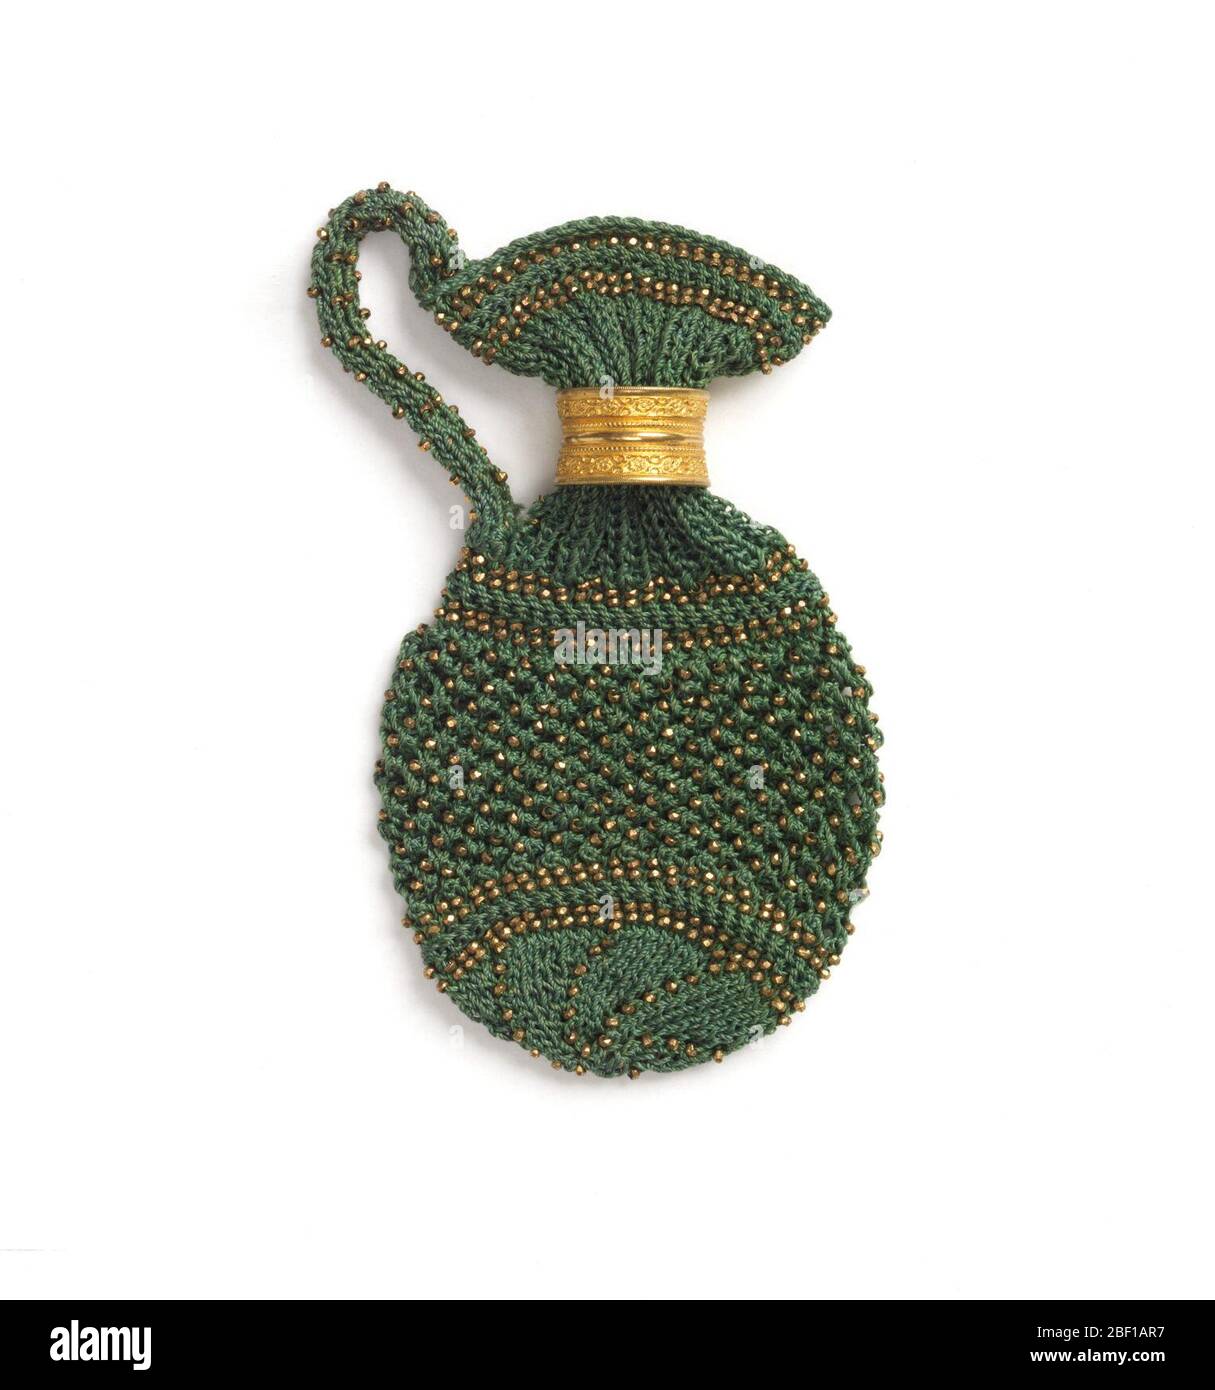 Purse pence jug. Knitted purse in the shape of a jug and ornamented with copper-colored beads. Stock Photo